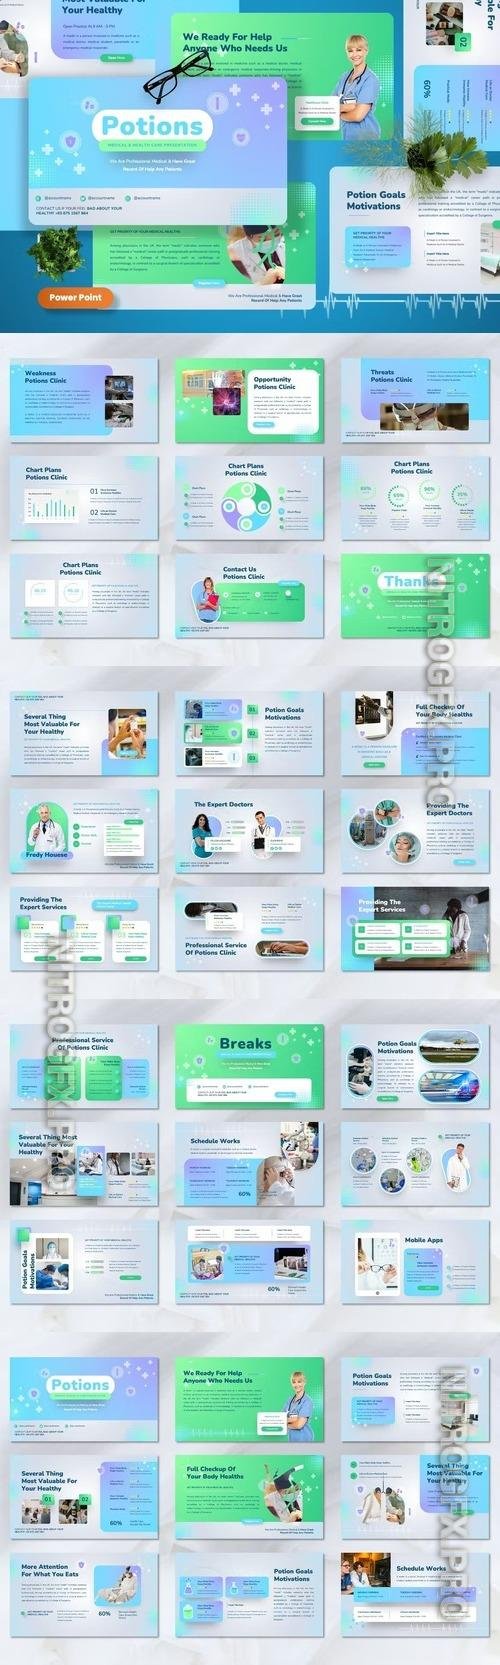 Potions - Medical & Healthcare Powerpoint Template